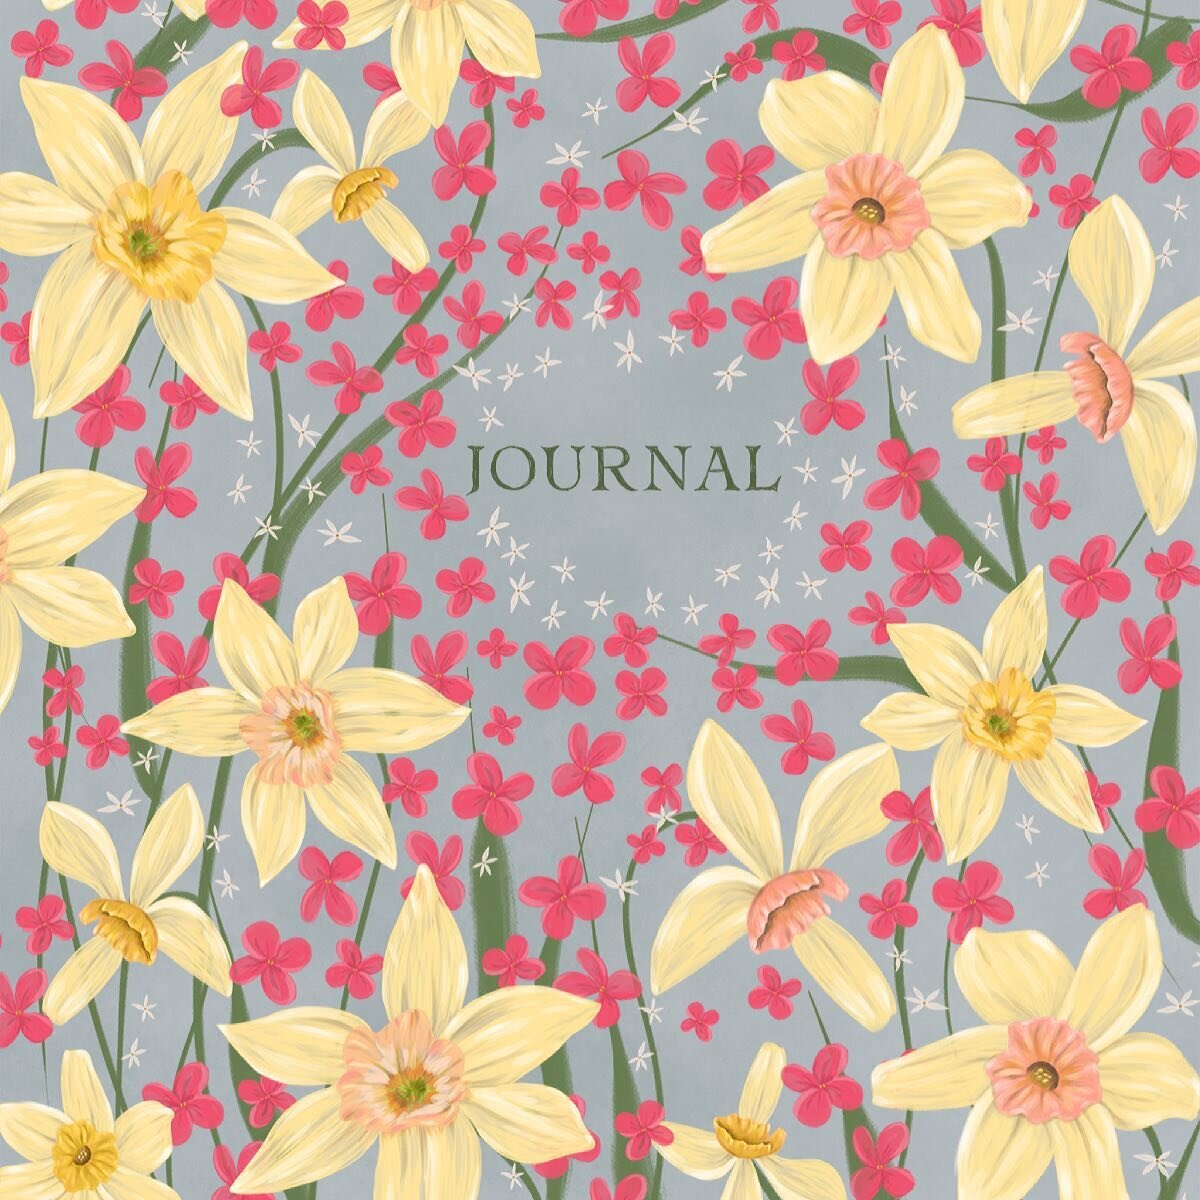 Still kind of tinkering with this journal cover assignment for @makeartthatsells I couldn&rsquo;t resist using our backyard daffodils that just started blooming. 
.
.
.
#makeartthatsells #matsbootcamp2021 #adobefresco #daffodils #floralart #surfacede